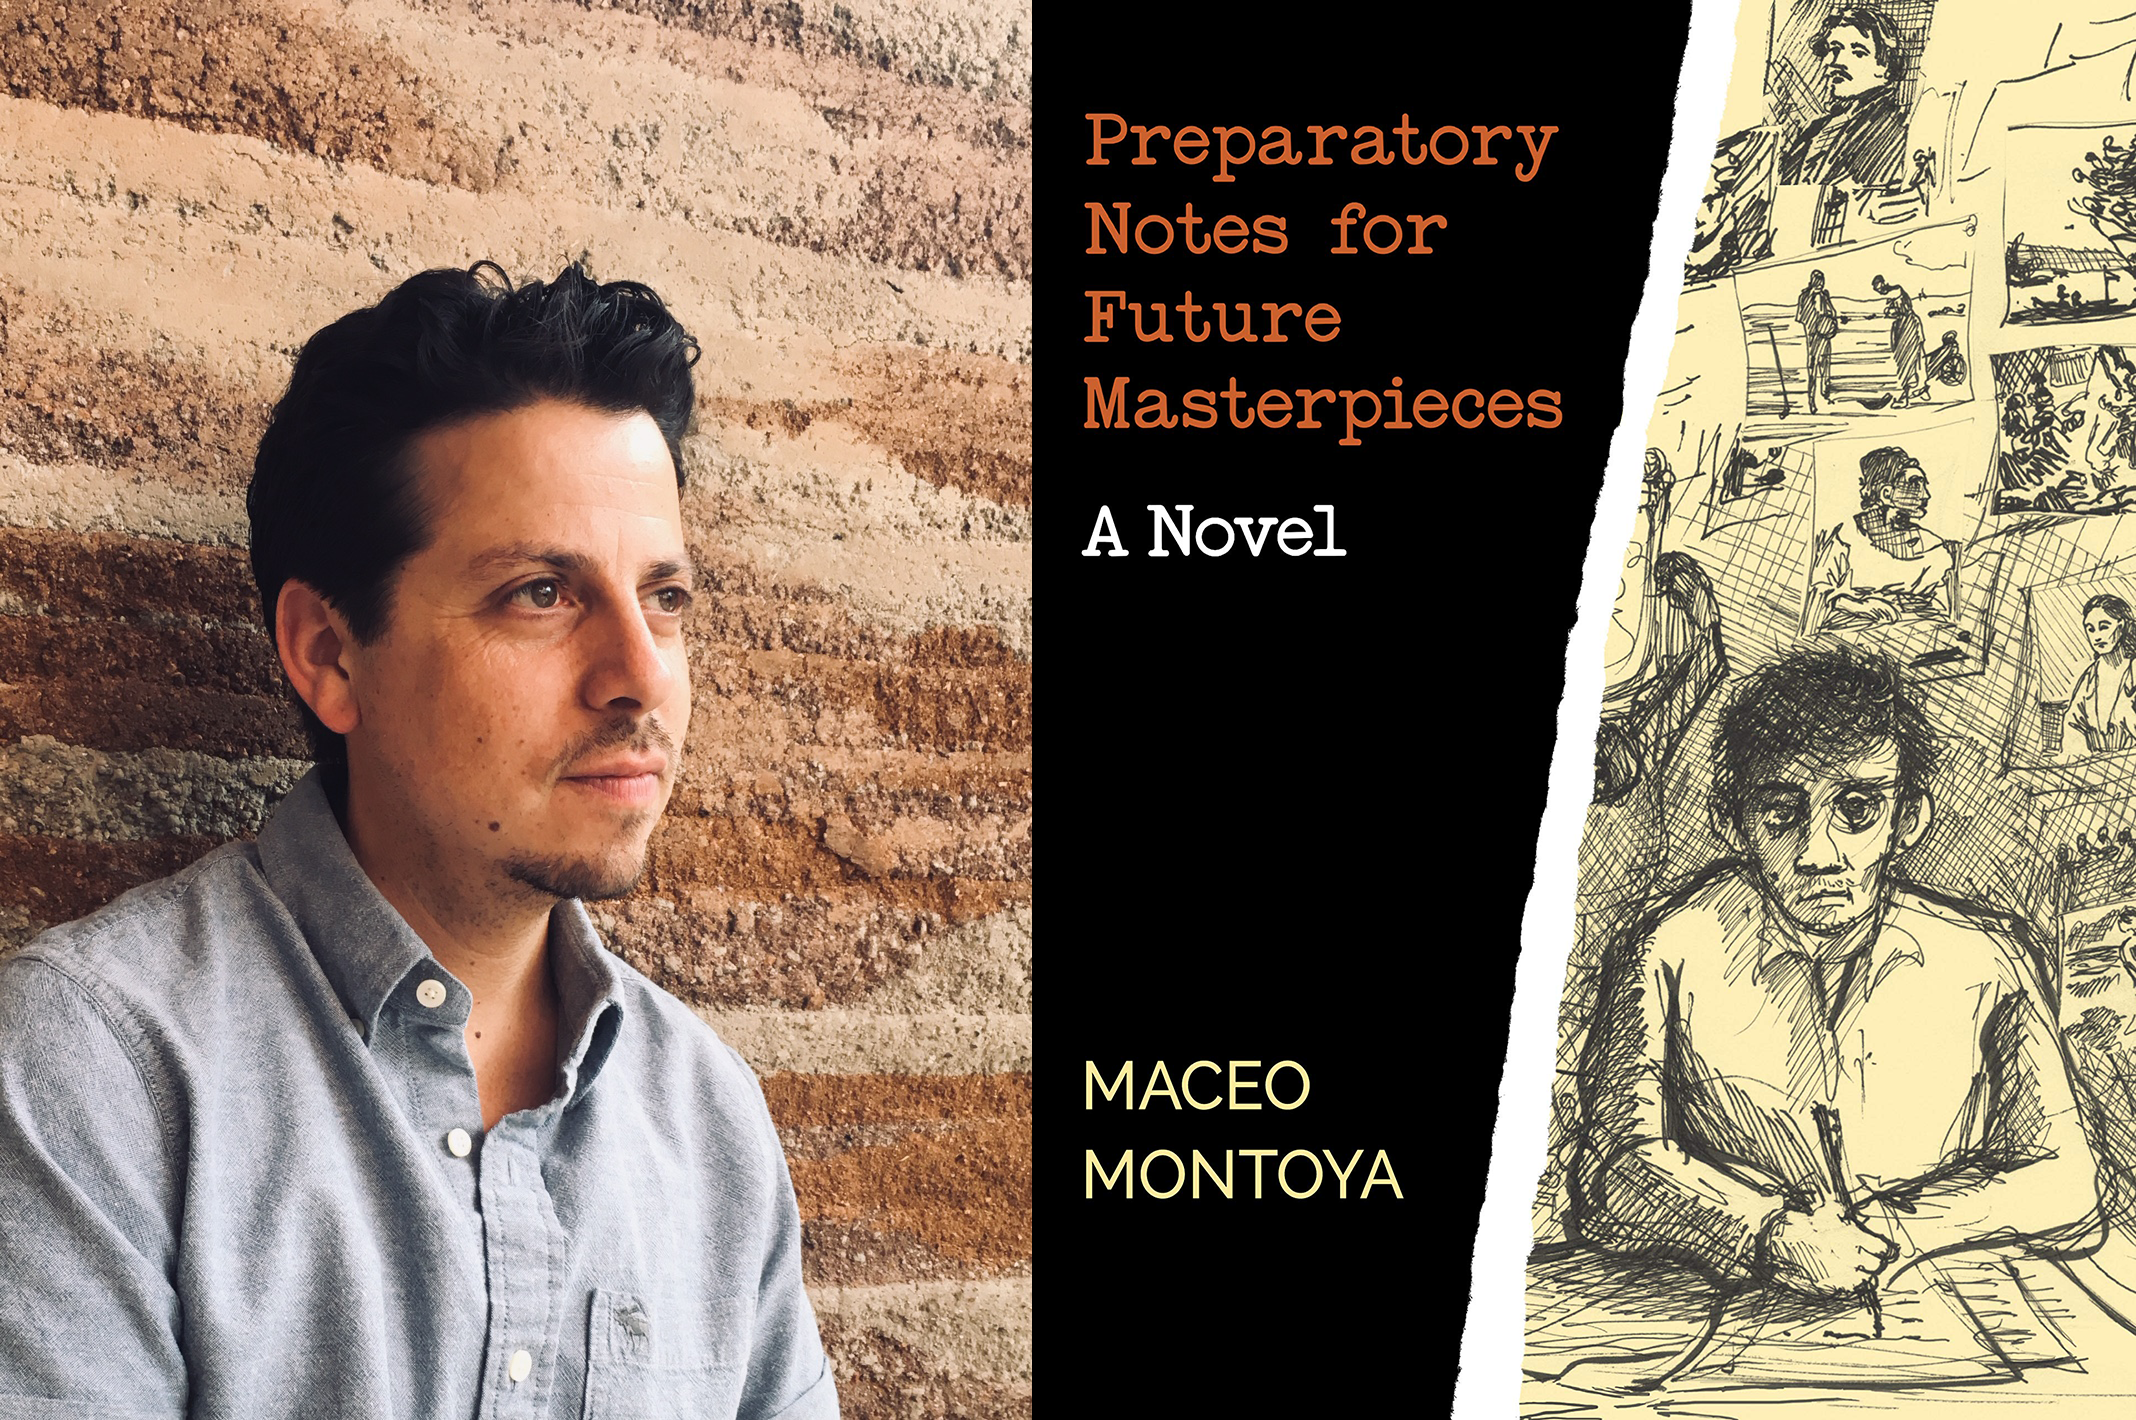 Headshot of Maceo Montoya and cover of his book “Preparatory Notes for Future Masterpieces”